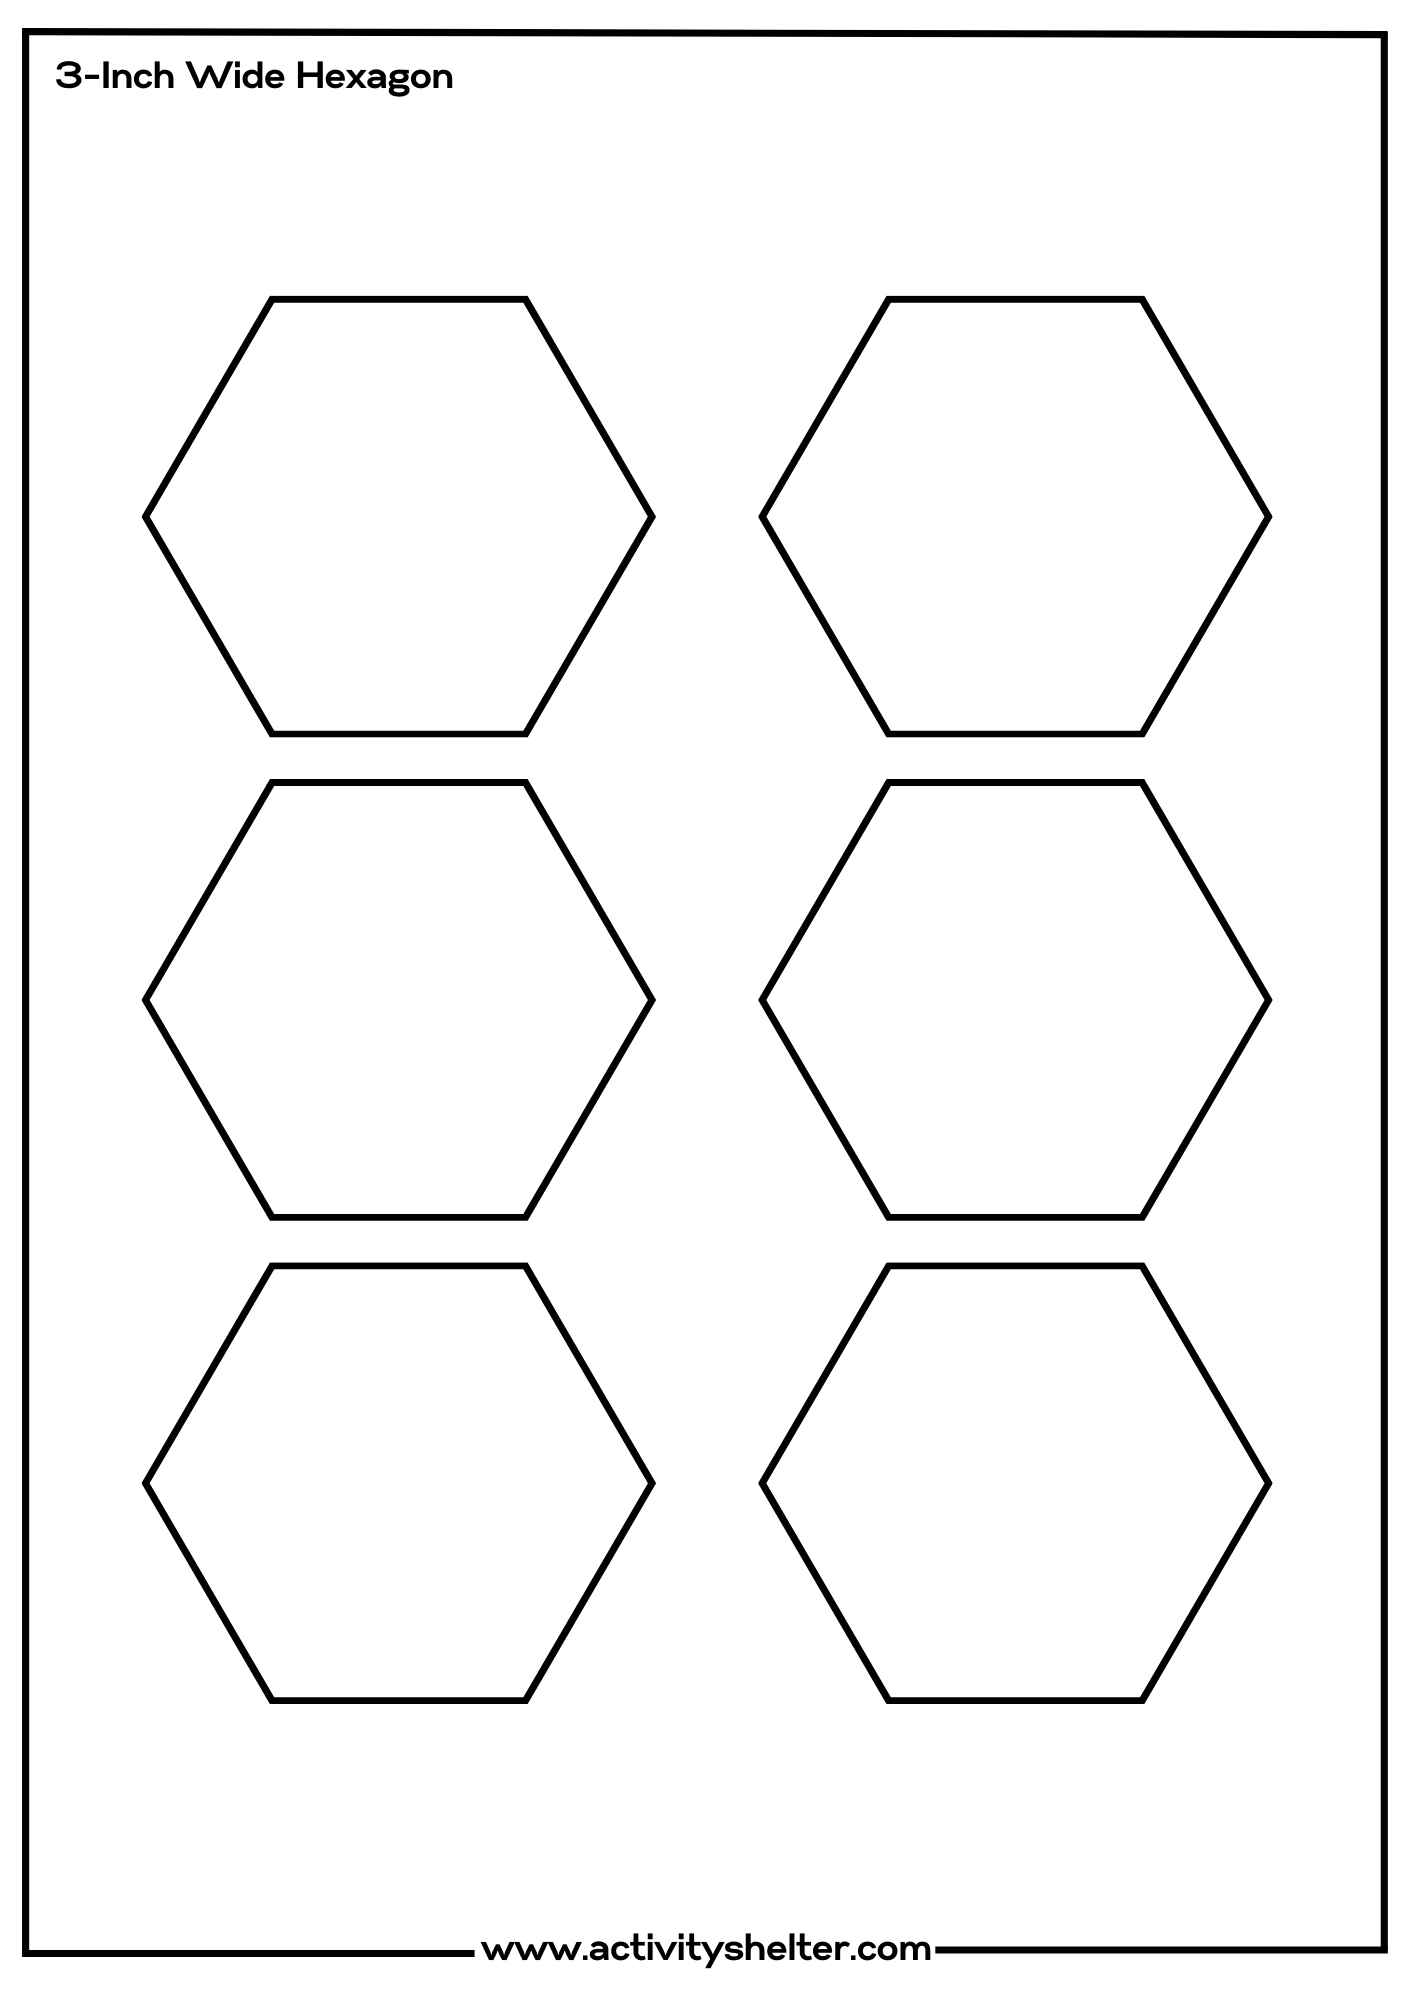 Hexagon Template Printable 3-Inch Wide